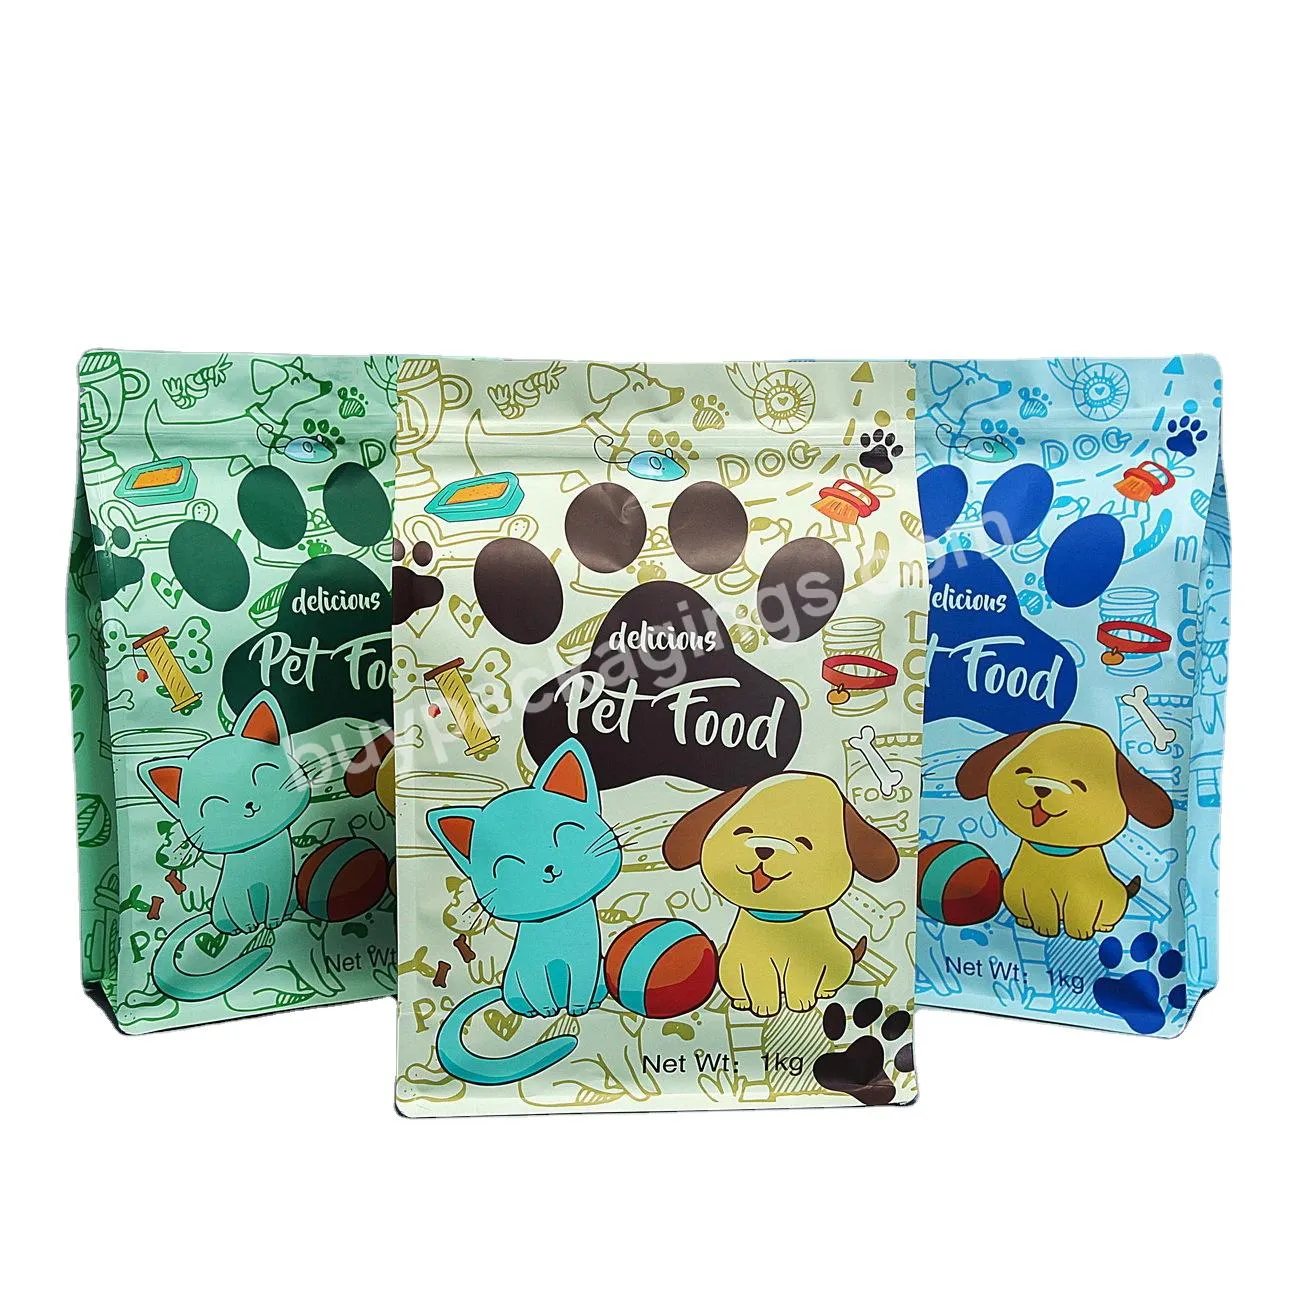 Custom Dog Cat Feed Bag Various Capacities Stand Up Pouch Zip Lock Resealable Plastic Pet Food Packaging Bag